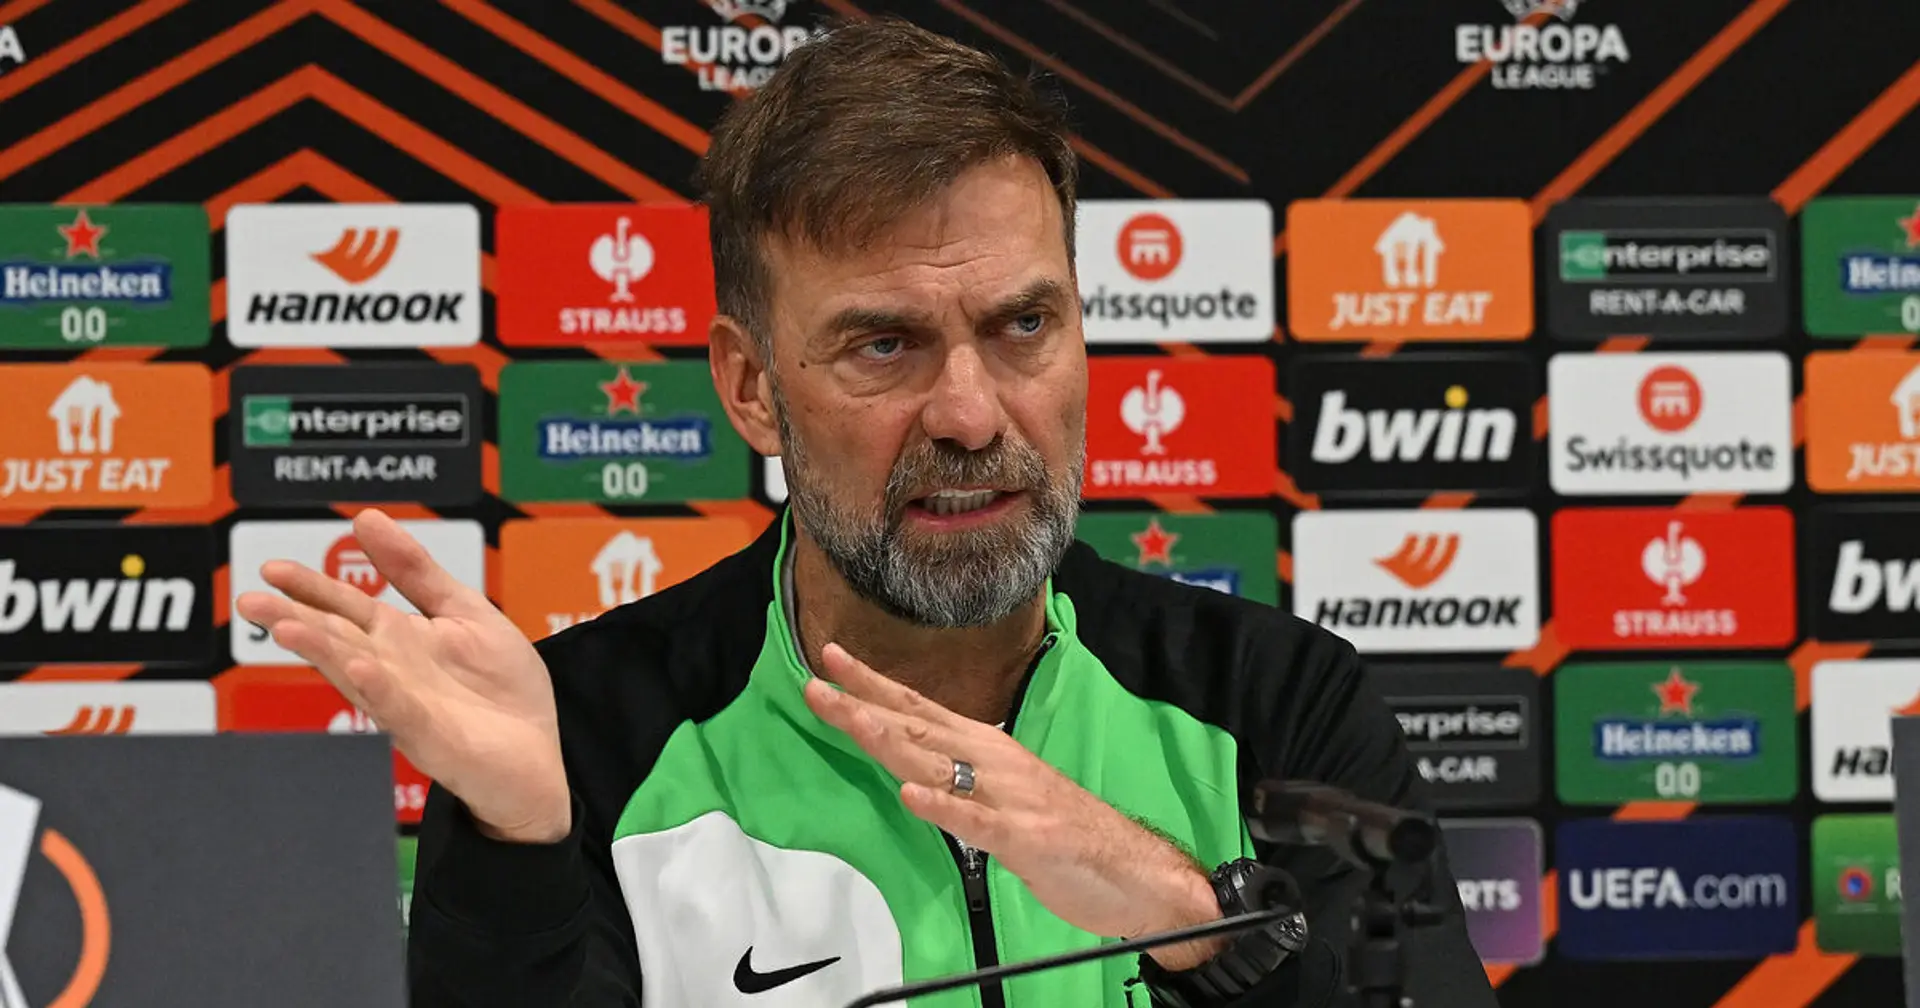 'What I can say': Jurgen Klopp reacts when asked if Liverpool can turn Atalanta tie around